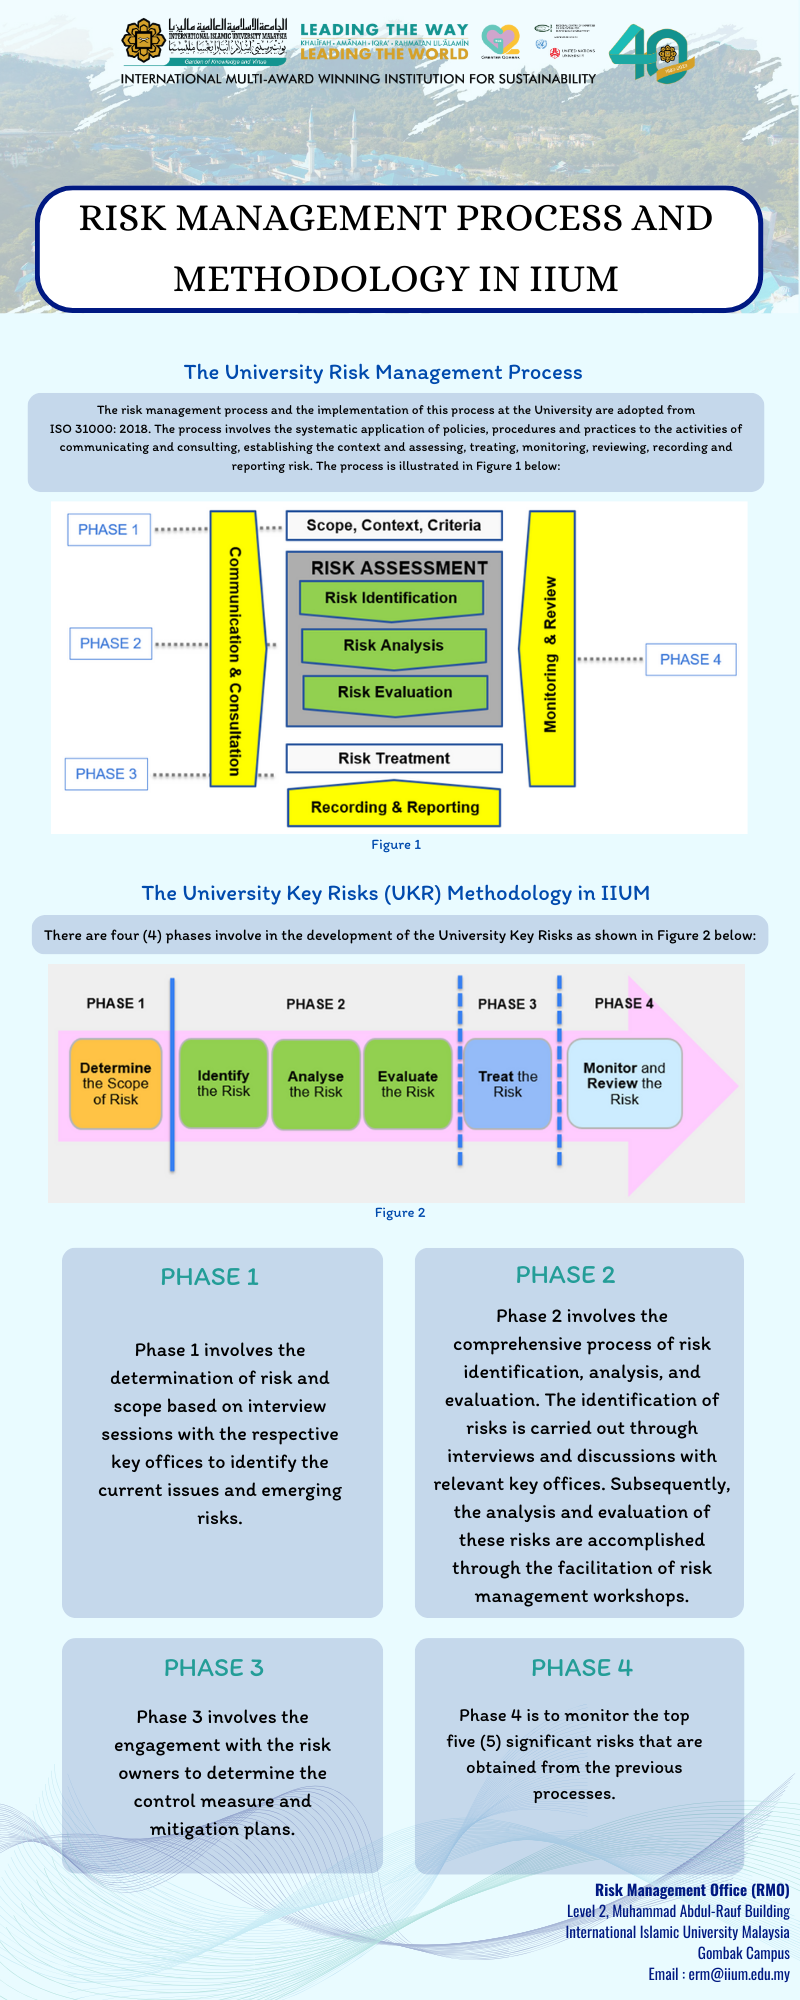 RMO Infographic No. 4 Risk Management Process and Methodology